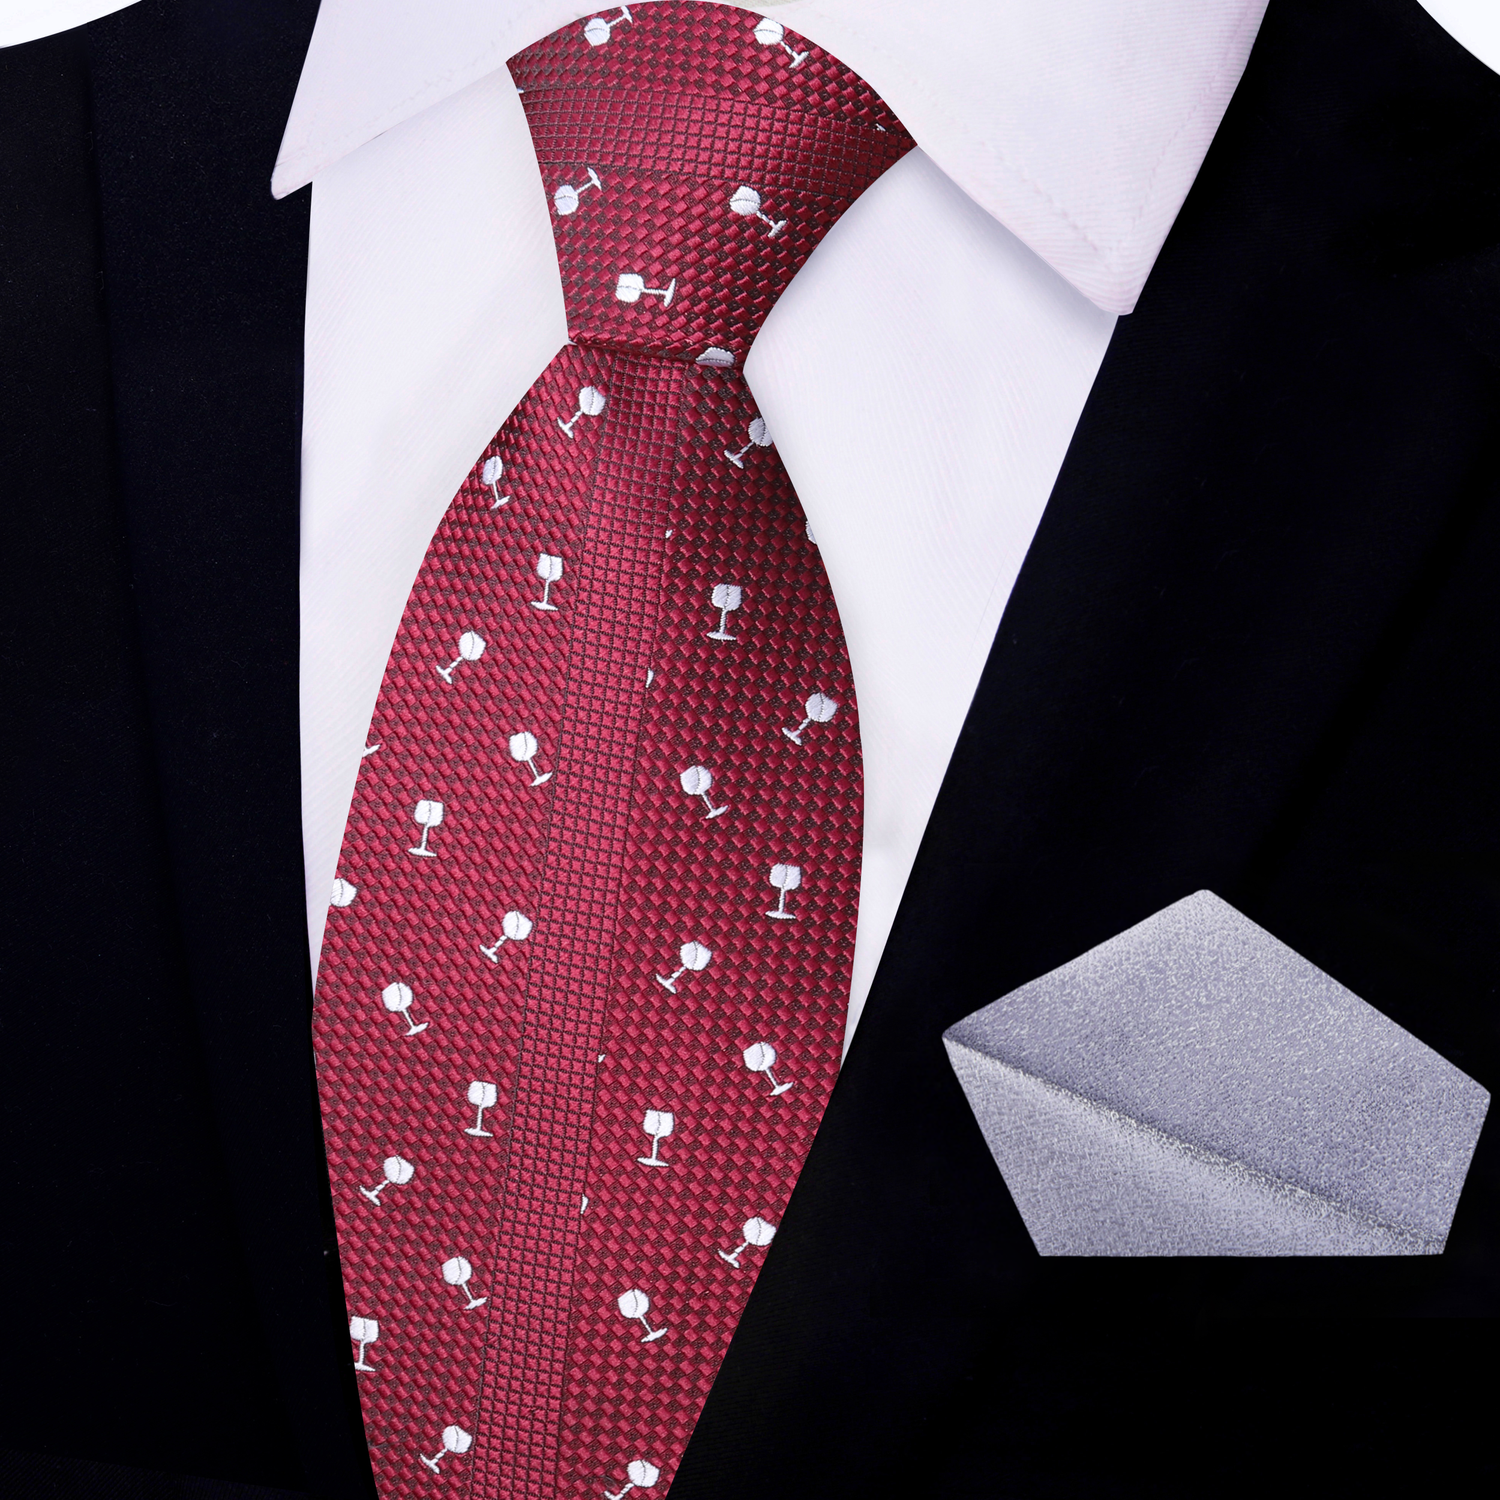 Deep Red with Light Grey Wine Glasses Necktie and Silver Pocket Square